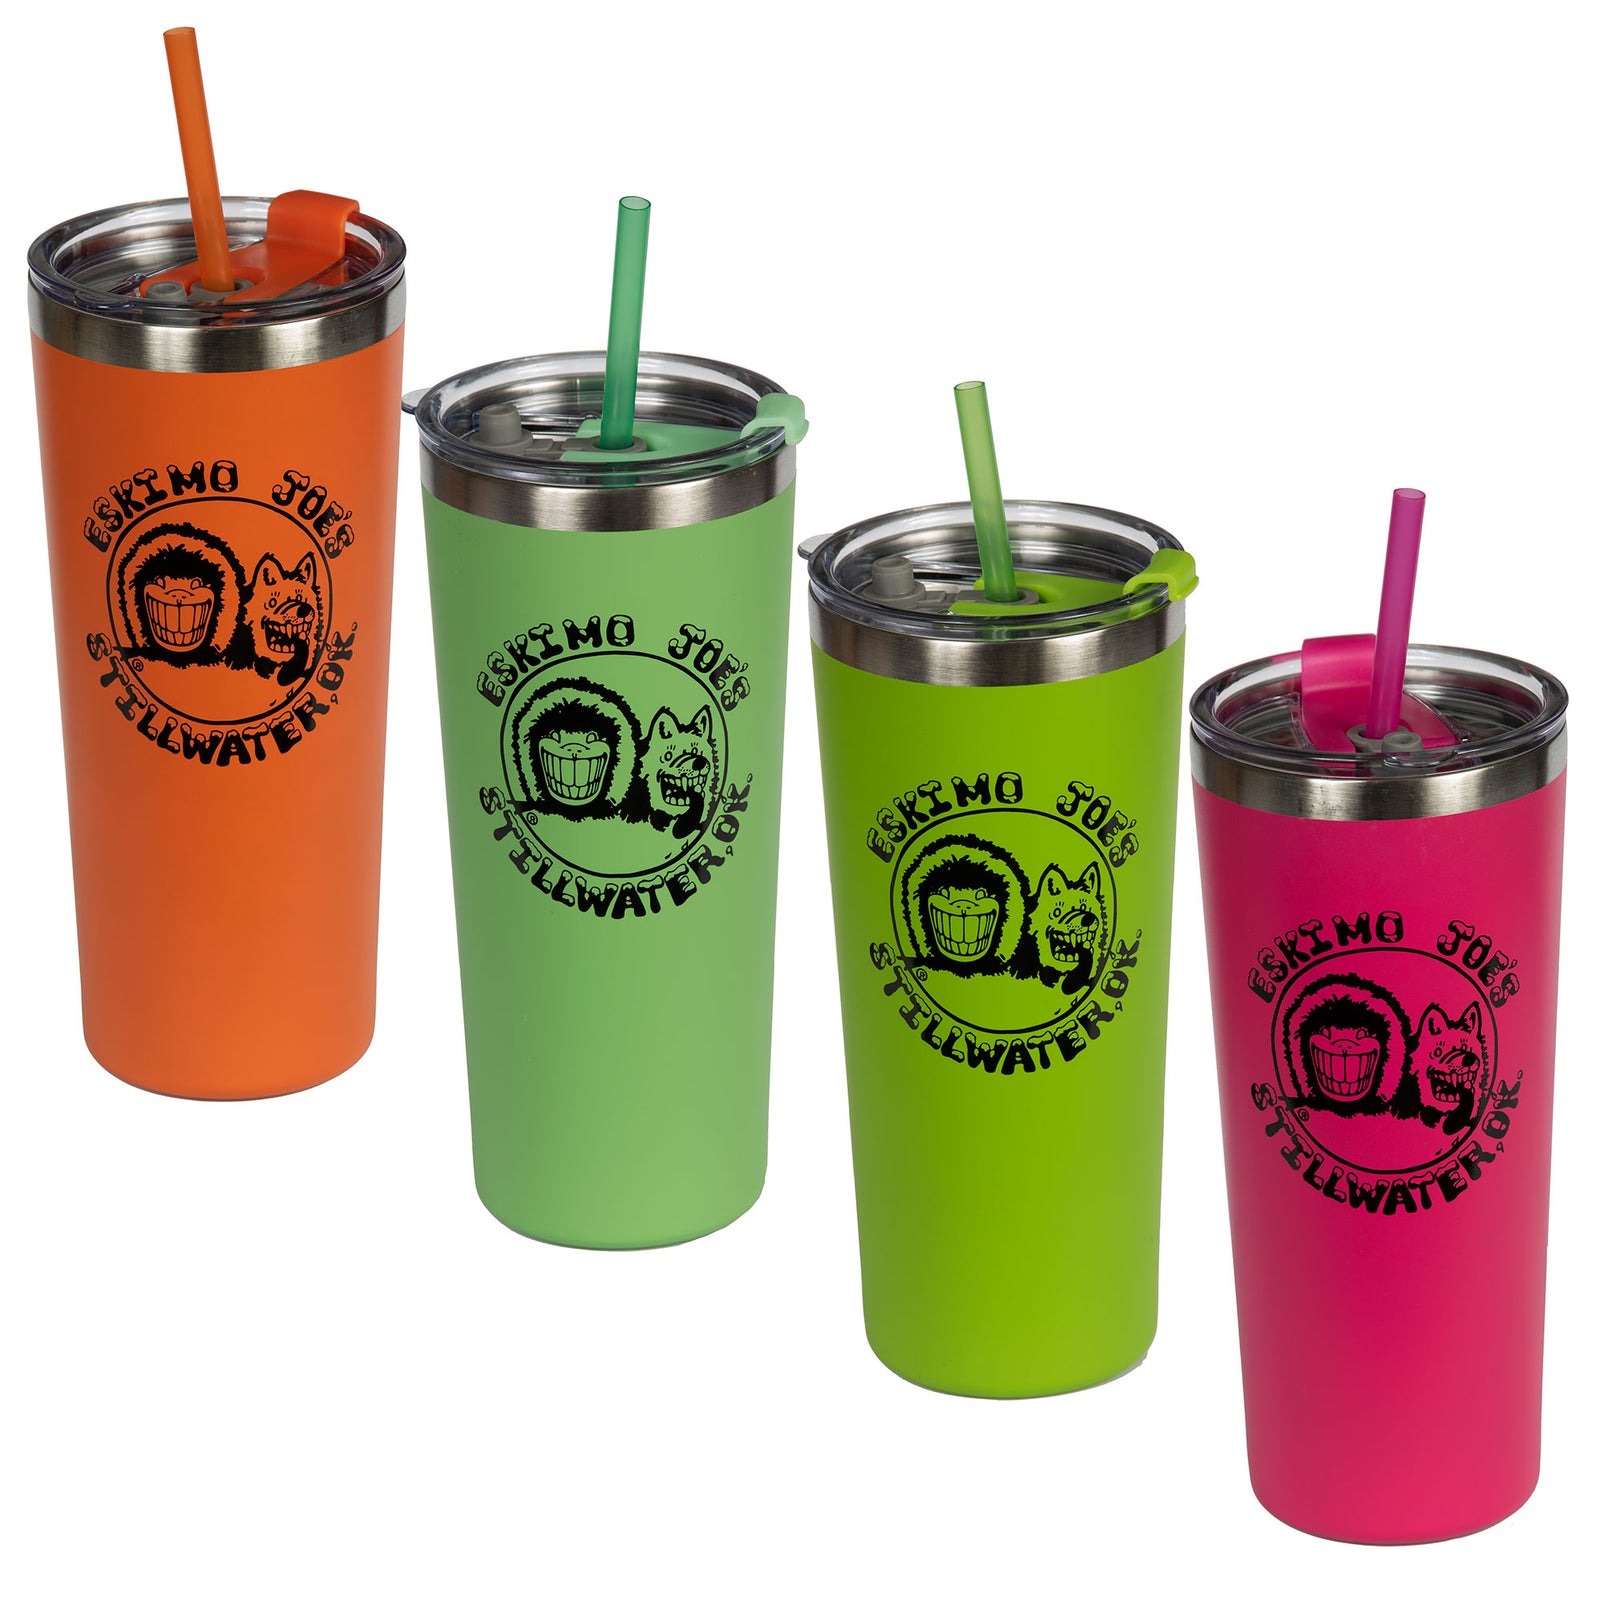 Stainless Steel Tumbler & Straw With Life is Short Make It Sweet